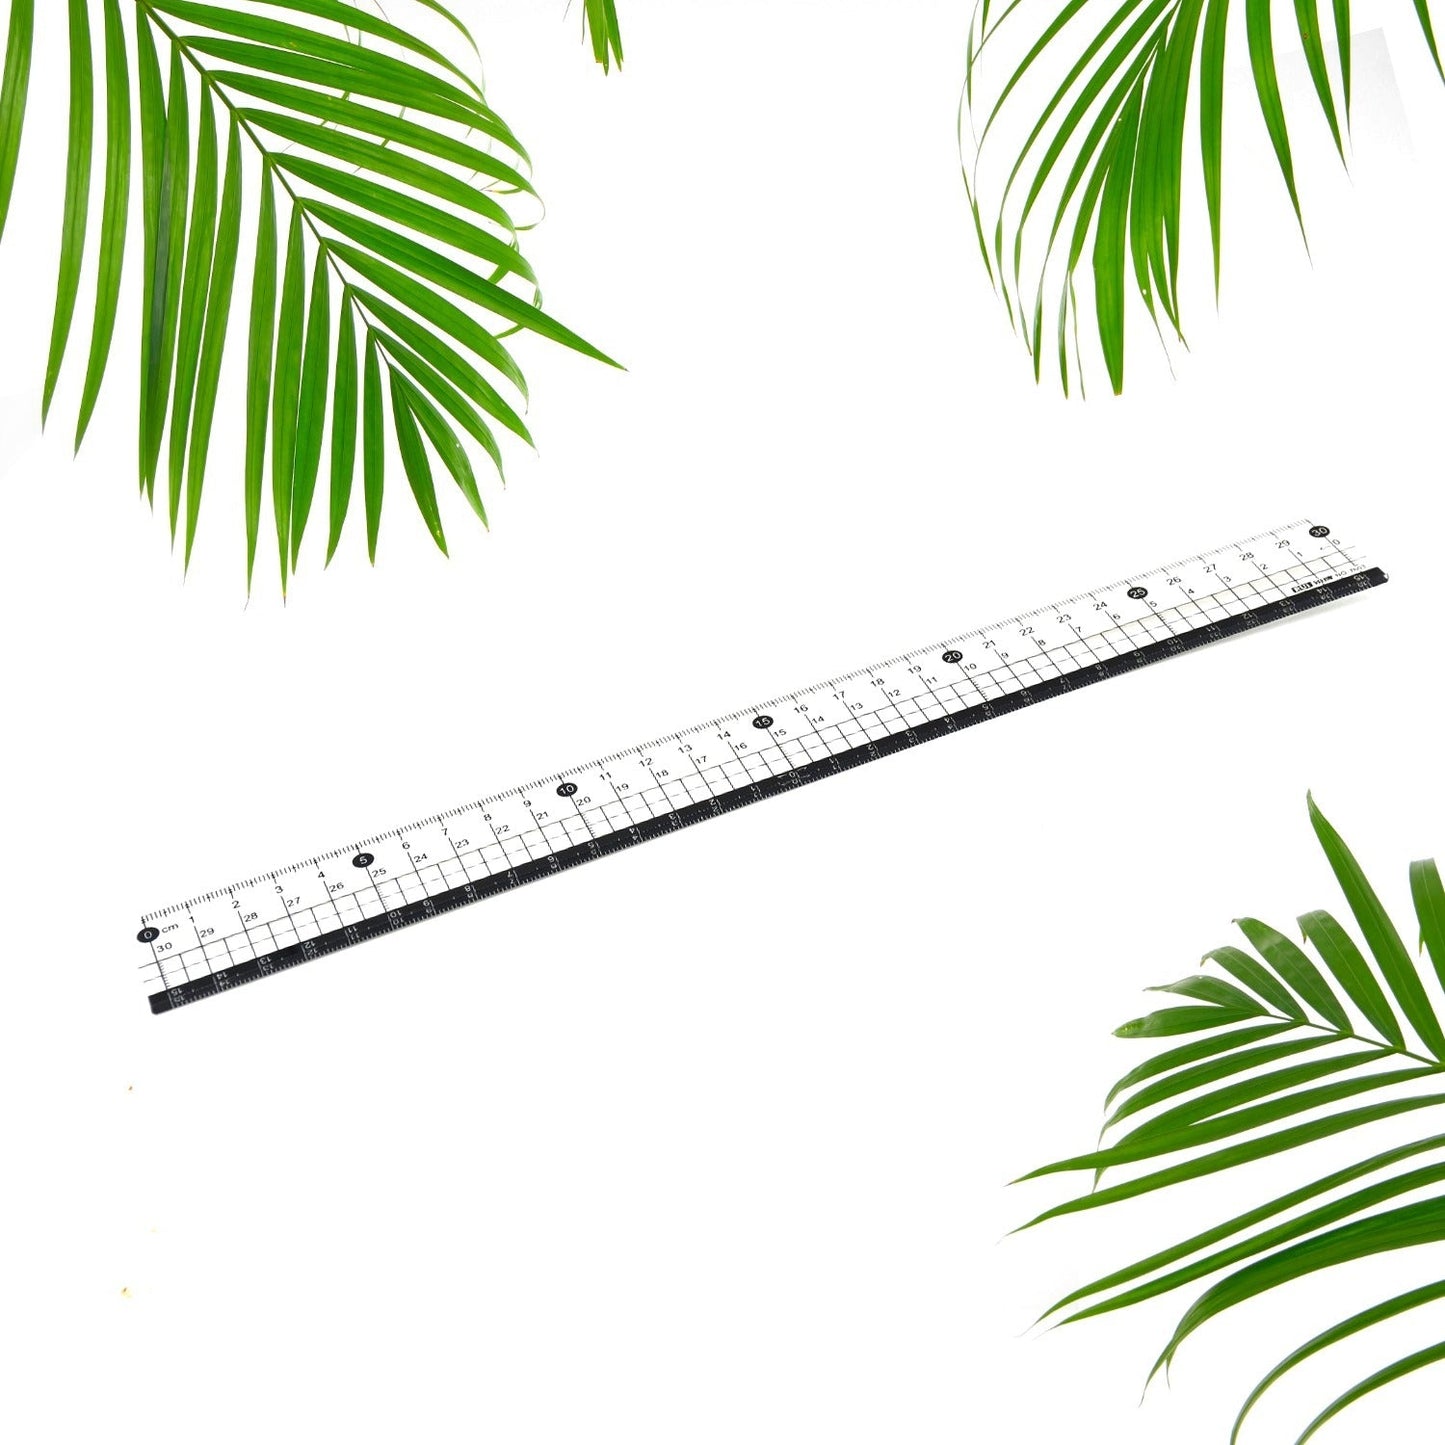 7922 TRANSPARENT RULER, PLASTIC RULERS, FOR SCHOOL CLASSROOM, HOME, OR OFFICE (30 Cm )